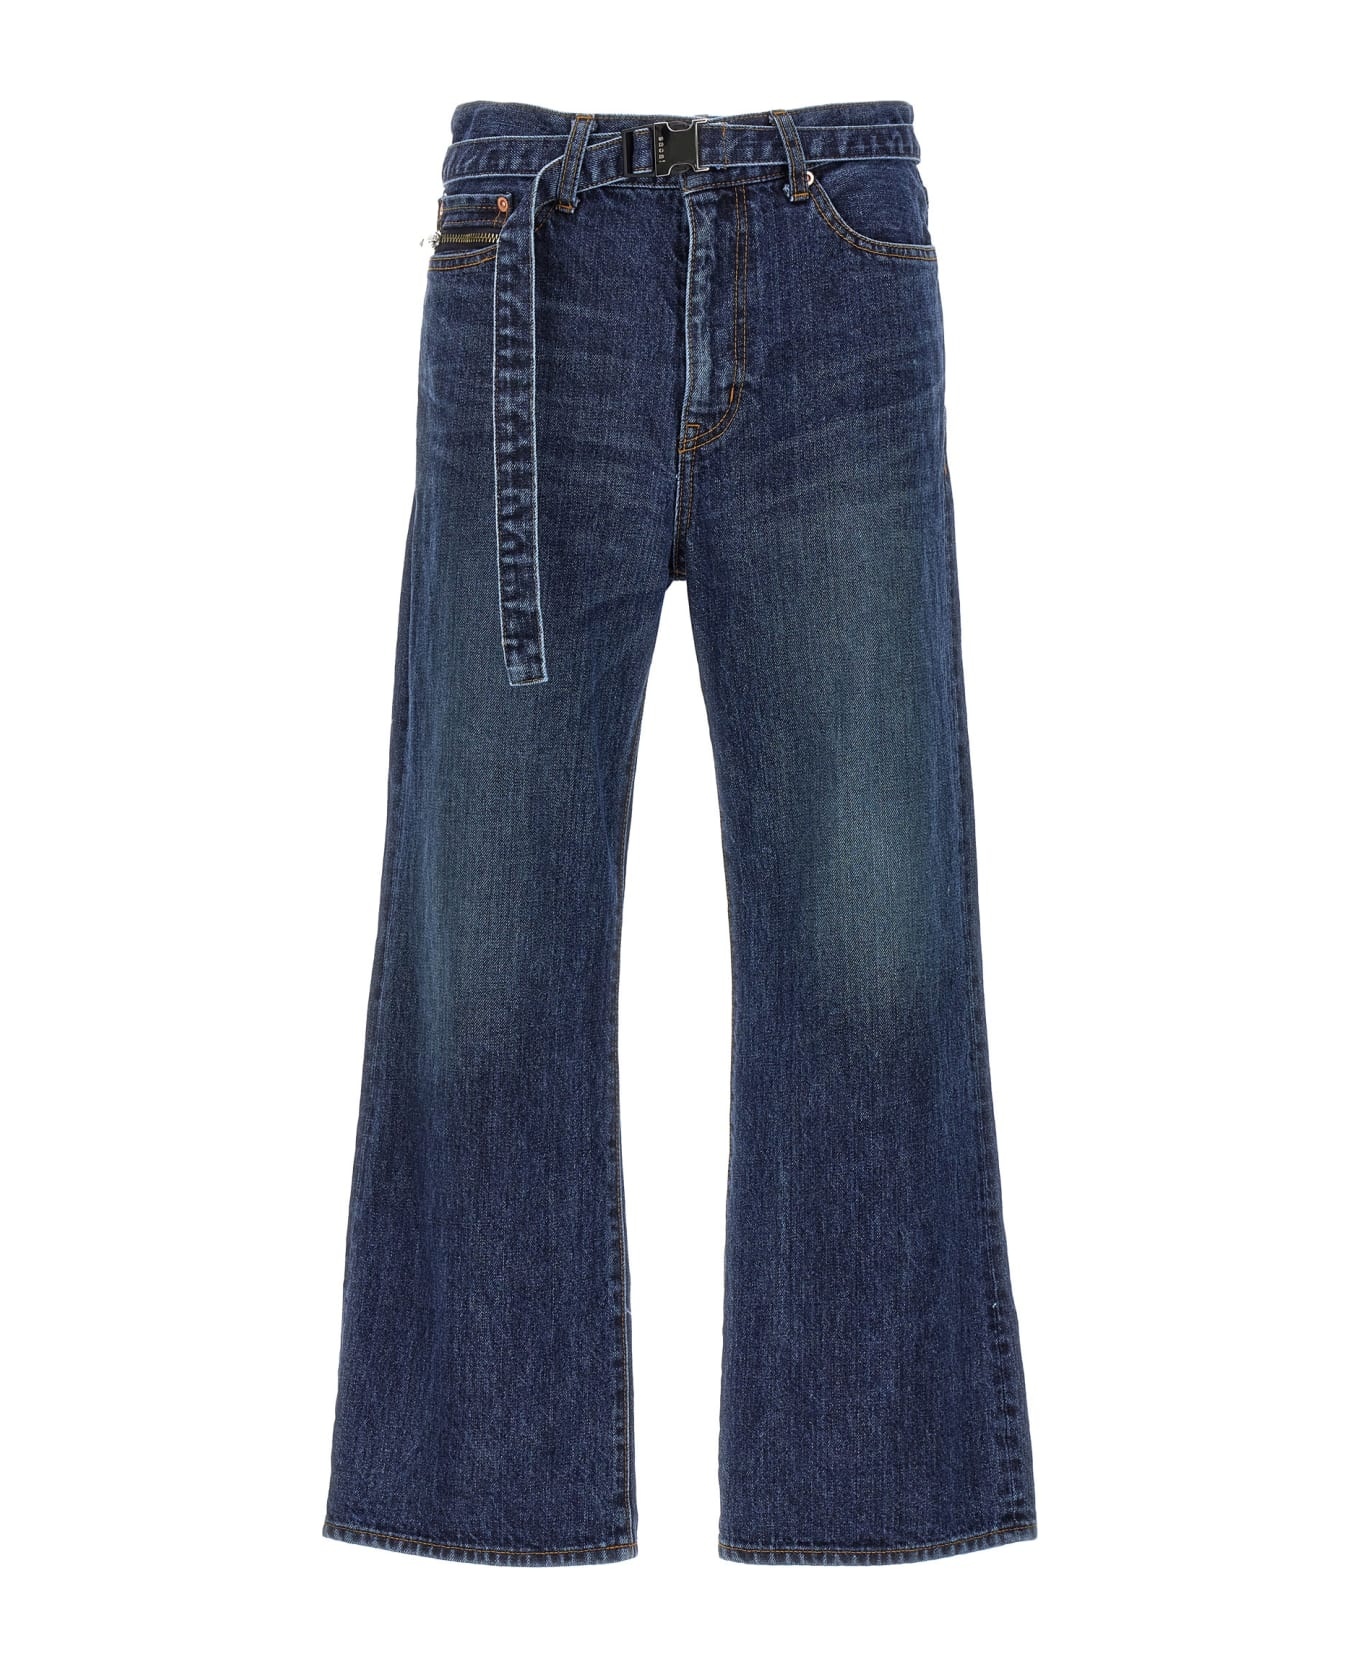 Bootcut Jeans - 1